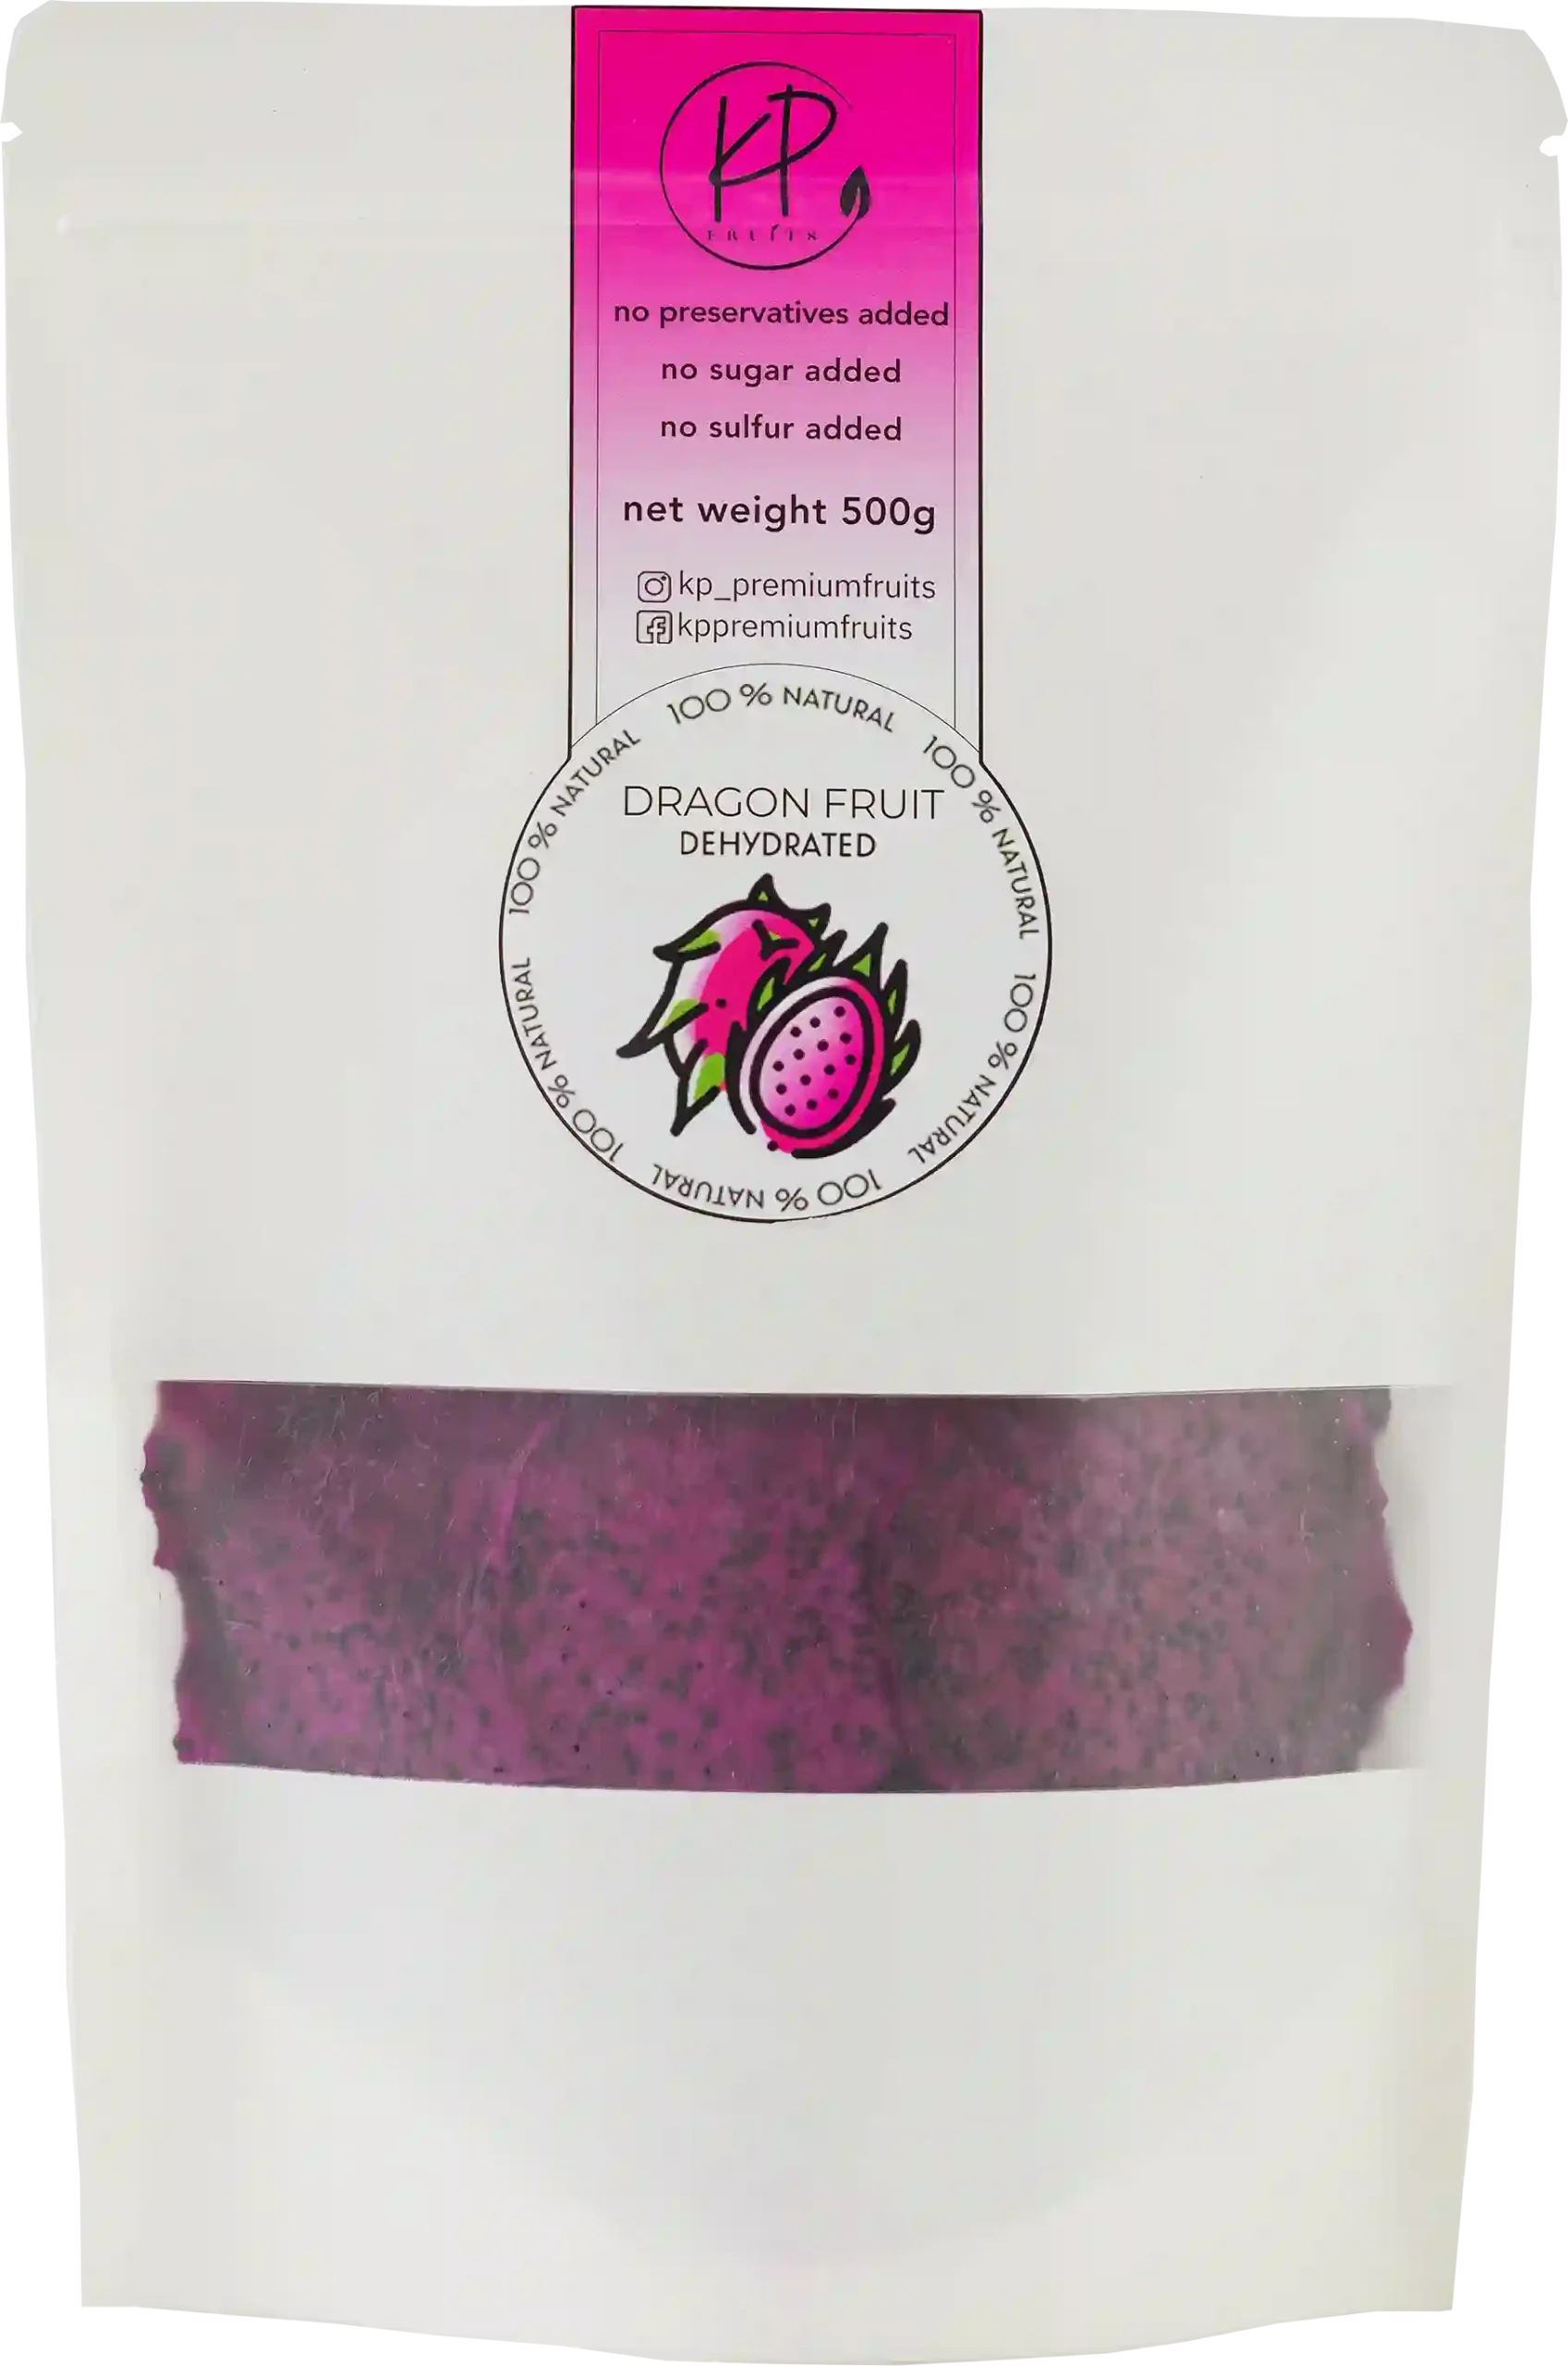 dried dragon fruit is an exotic and flavorful snack, capturing the vibrant colors and distinct taste of dragon fruit in a chewy and preserved form.